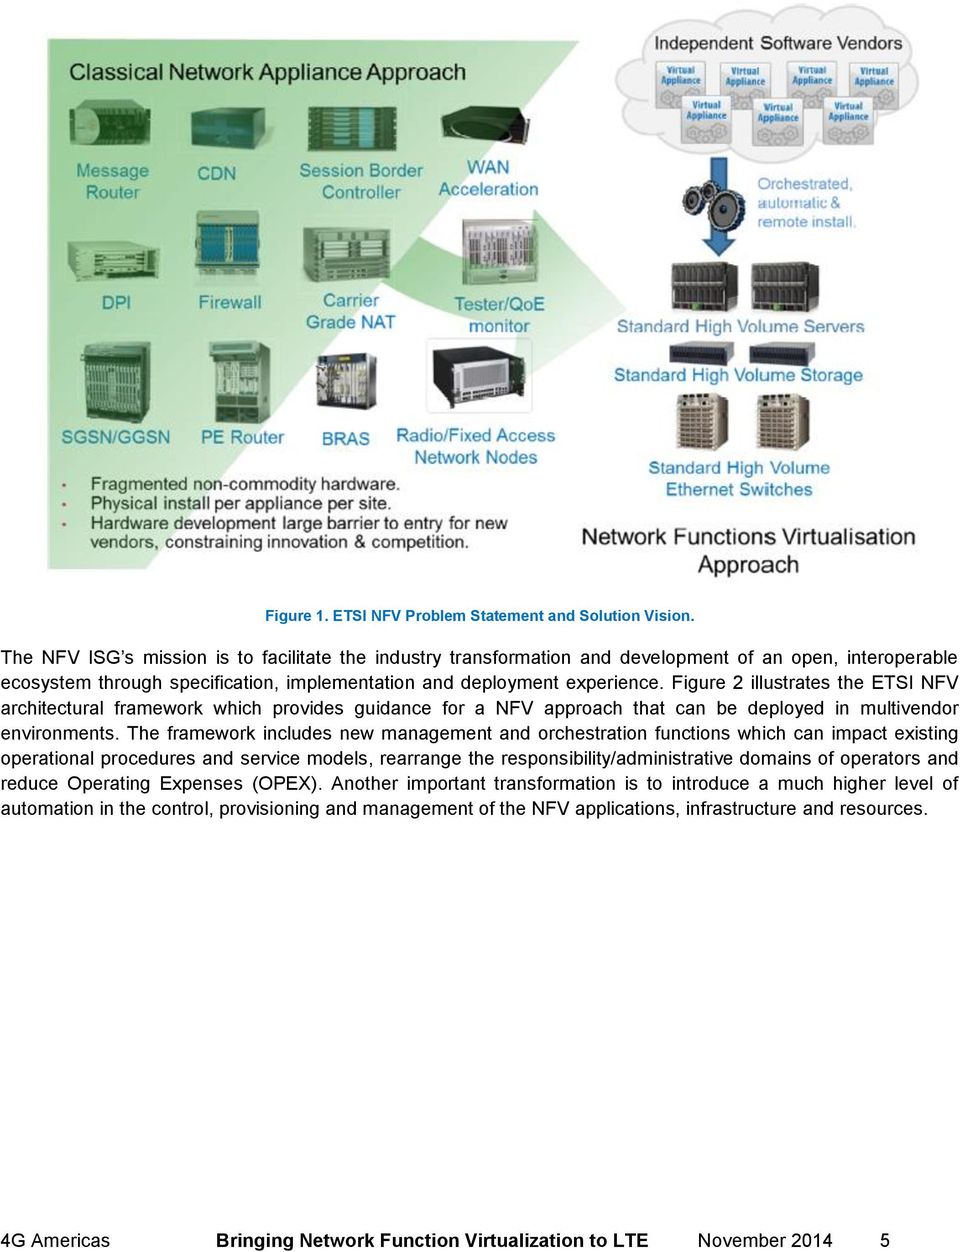 Figure 2 illustrates the ETSI NFV architectural framework which provides guidance for a NFV approach that can be deployed in multivendor environments.